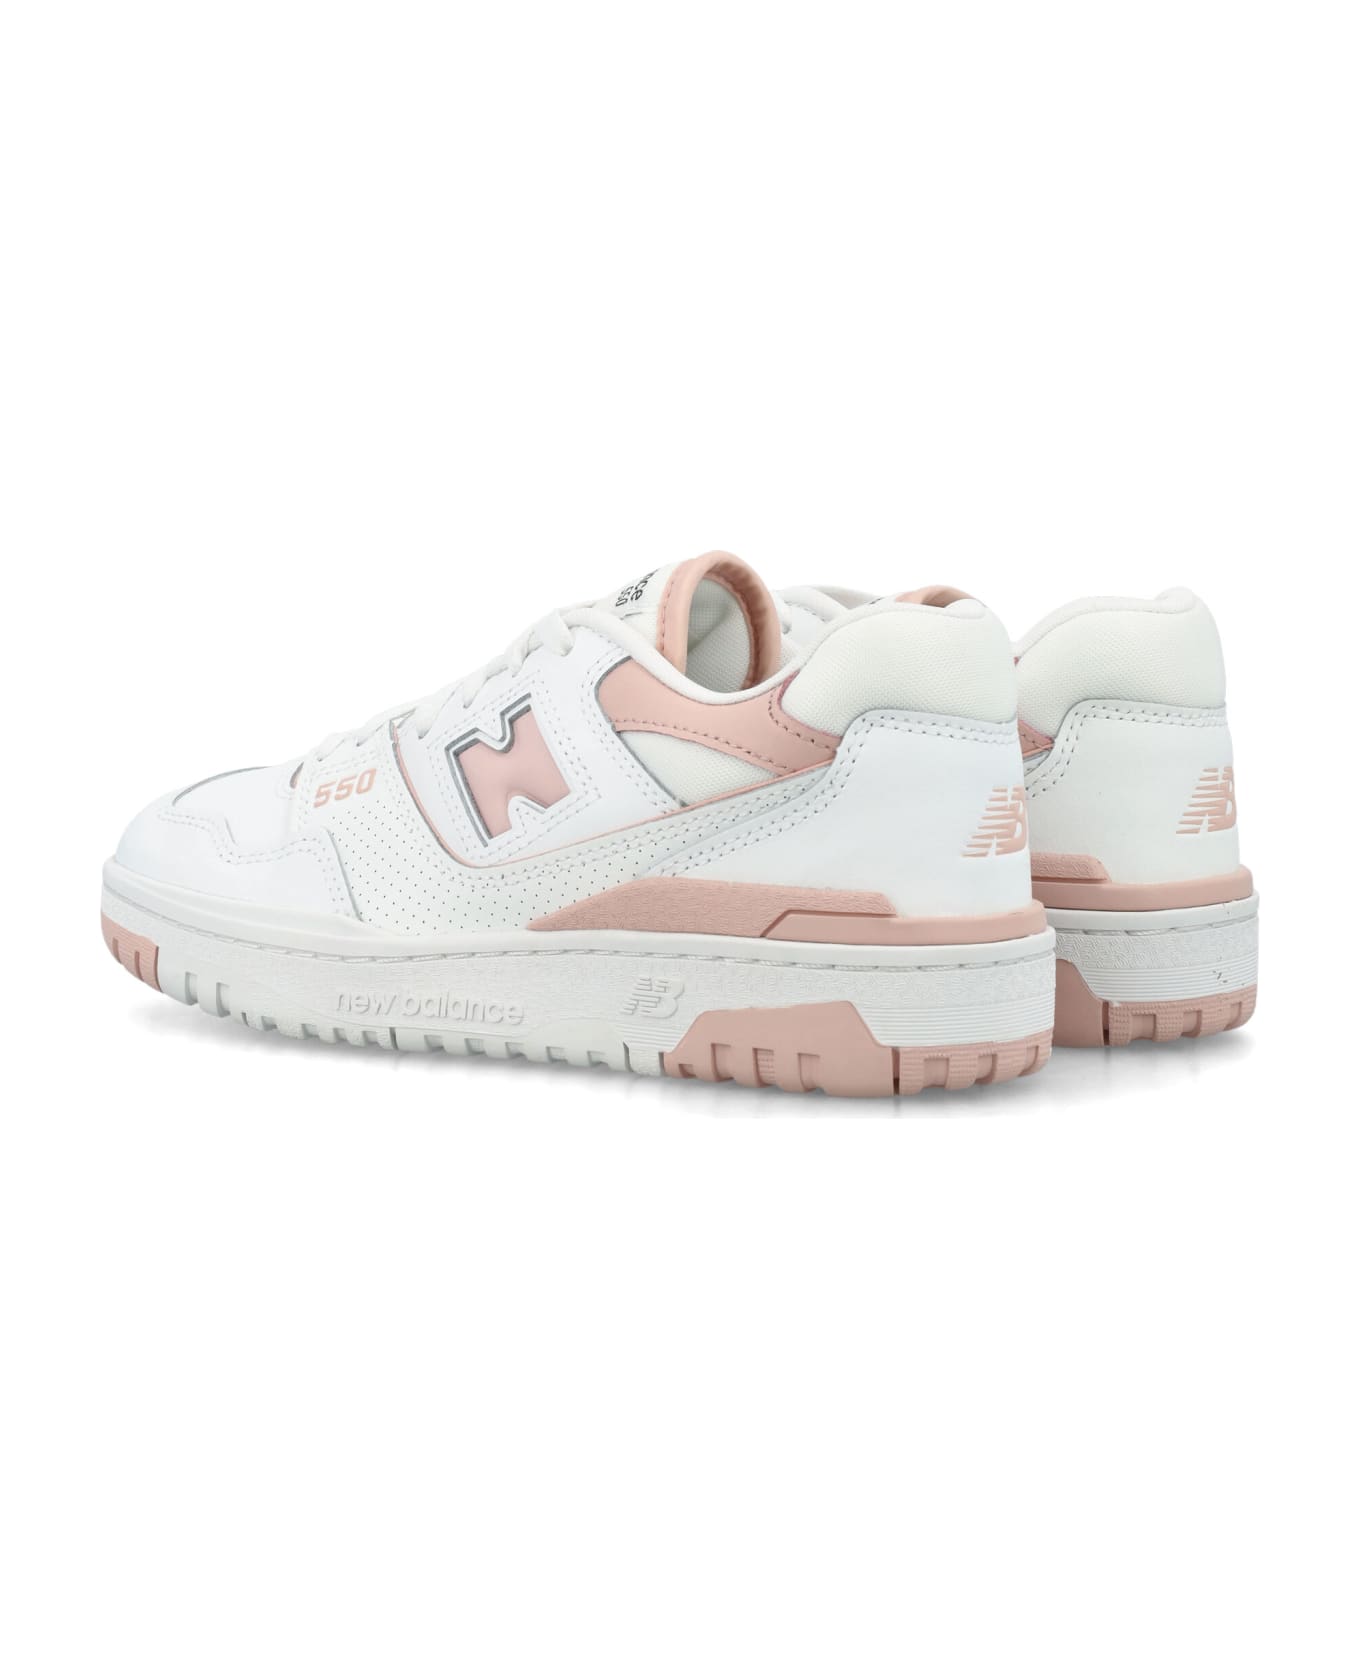 New Balance 550 Woman's Sneakers - WHITE PINK